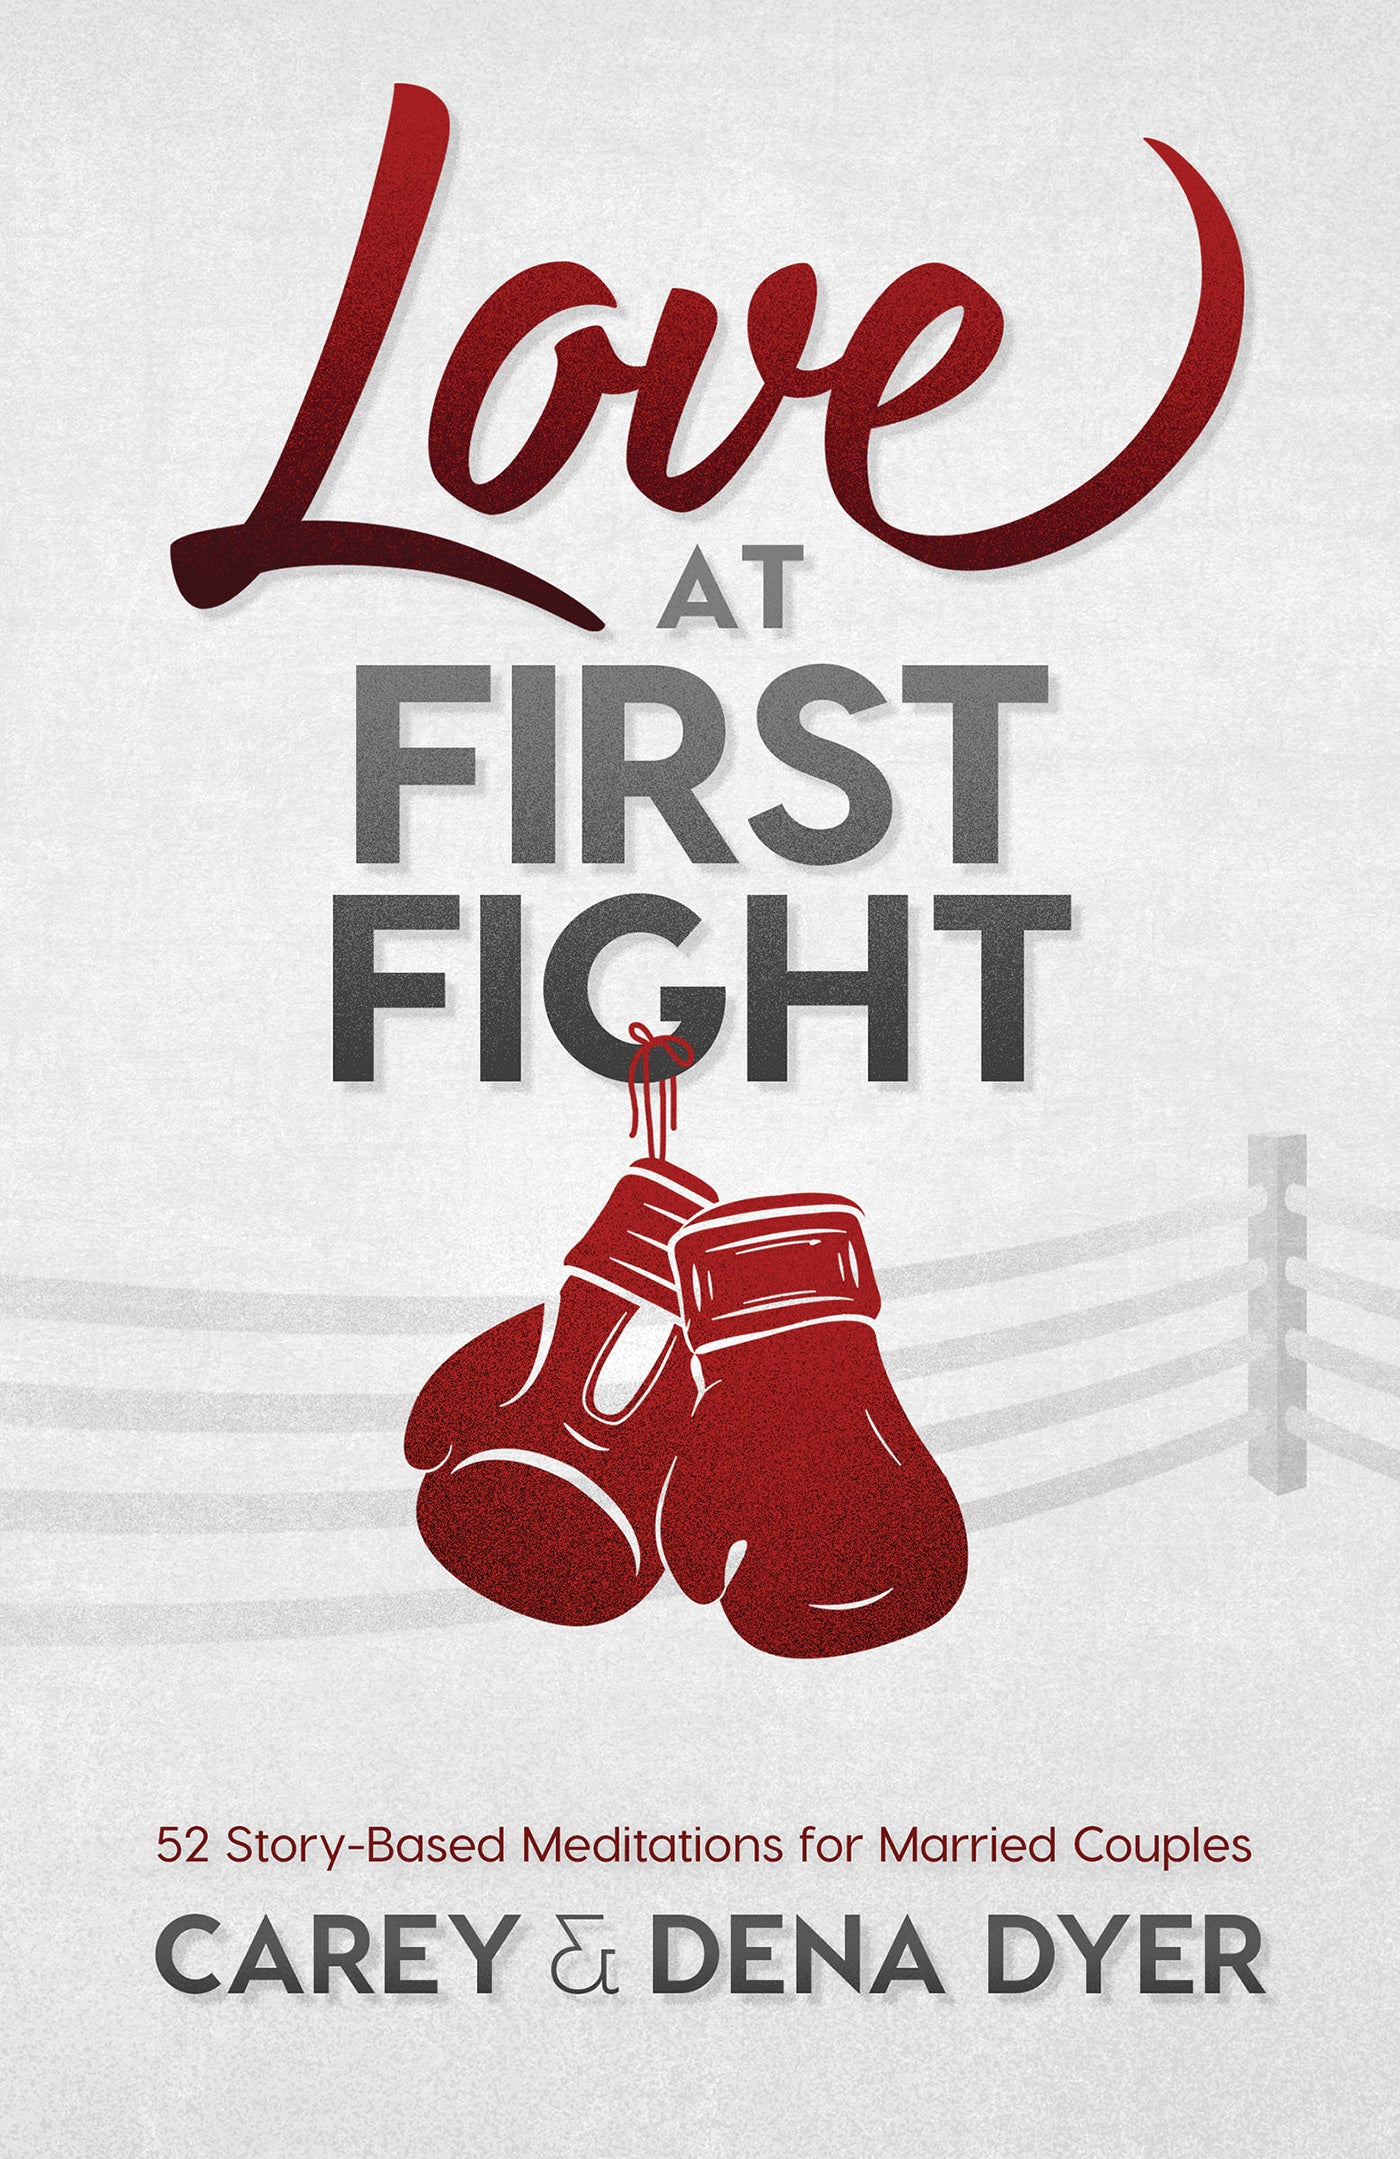 Love at First Fight - The Christian Gift Company